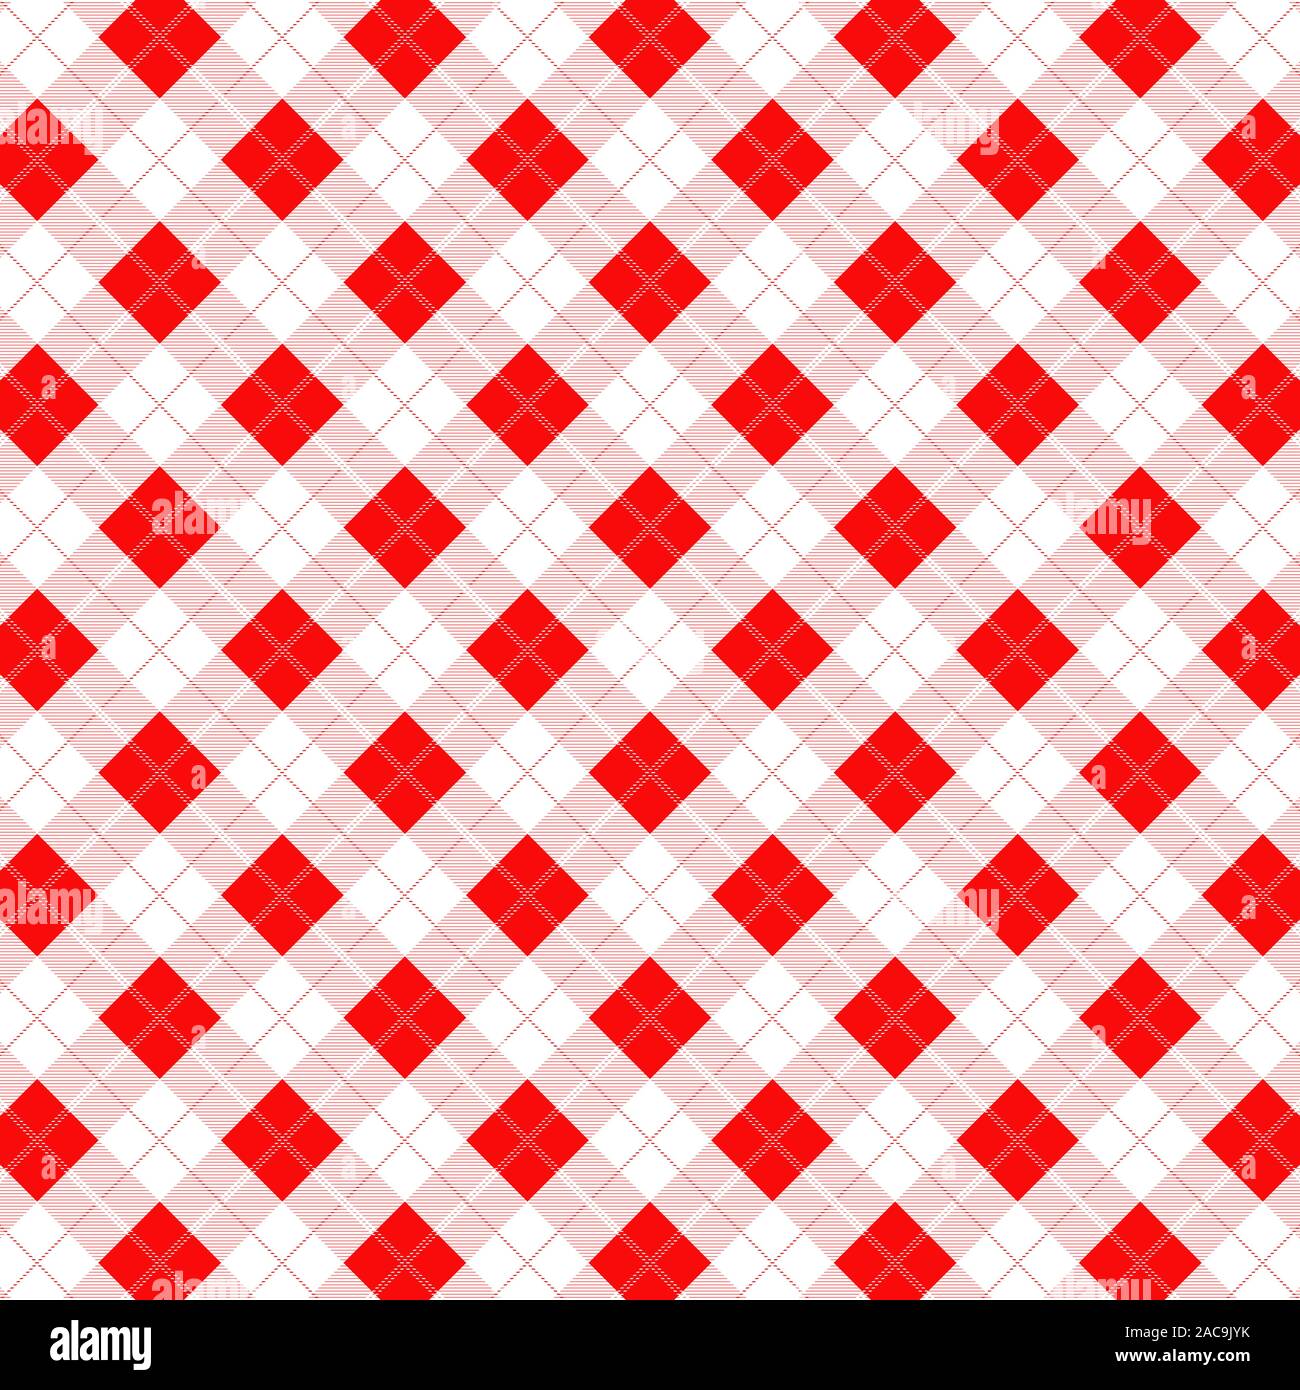 Tartan red and white seamless pattern. Texture for plaid, tablecloths, clothes, shirts, dresses, paper, bedding, blankets, quilts and other textile pr Stock Vector